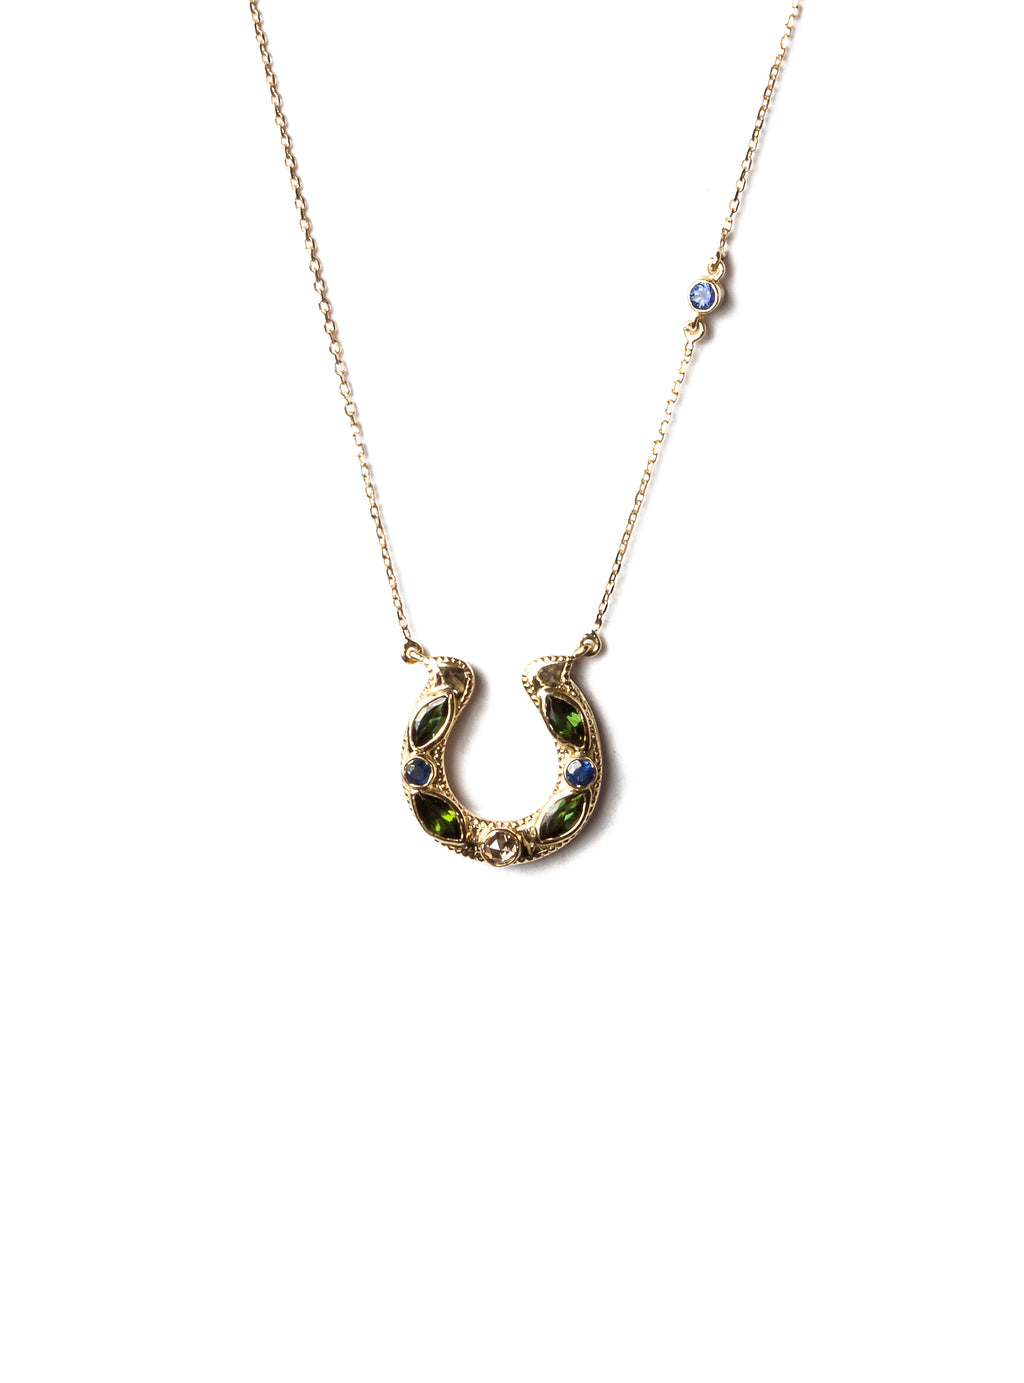 Horseshoe Necklace with Marquise Tourmalines, Sapphires and Diamonds